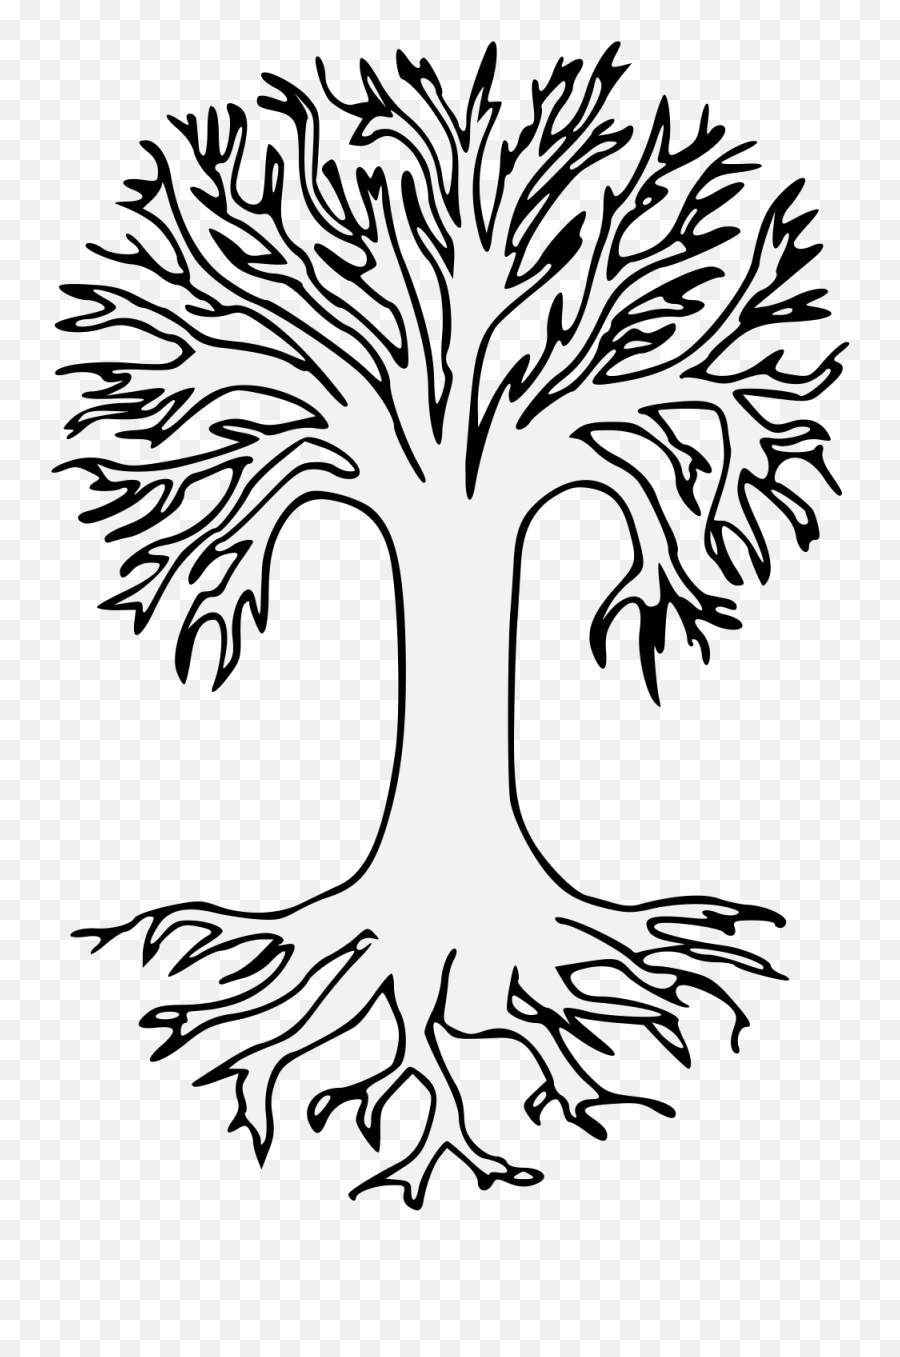 Download Hd Details Png - Png Bare Tree Drawing With Roots Bare Tree With Roots,Bare Tree Png